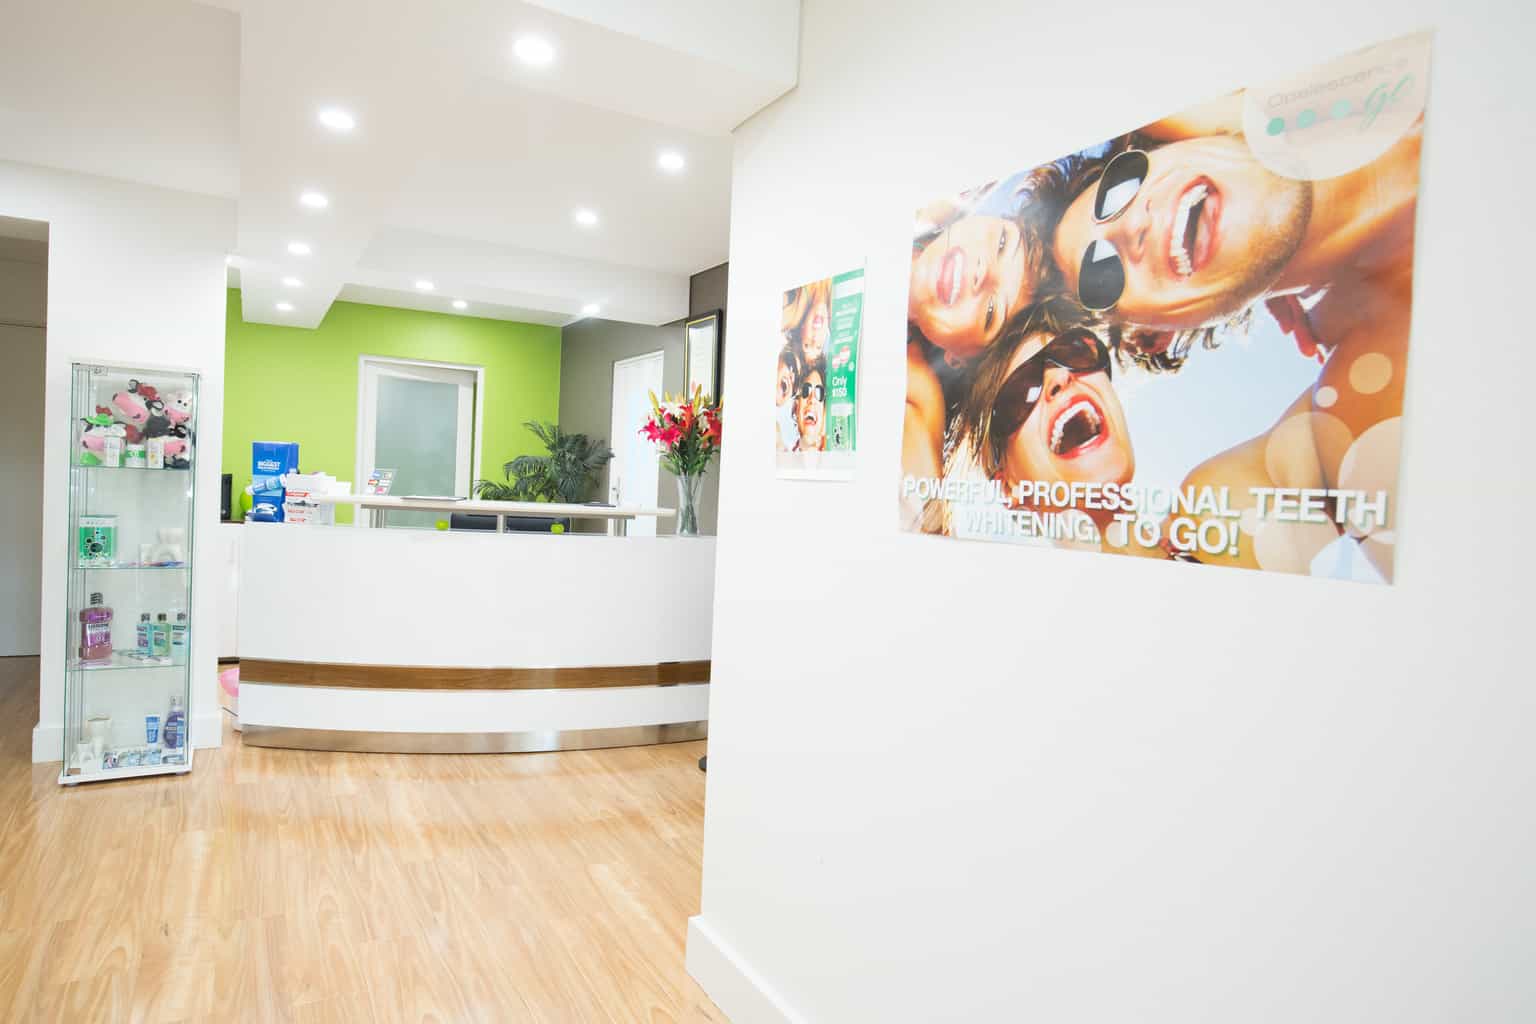 Best reviewed family dentist in chatswood, nsw